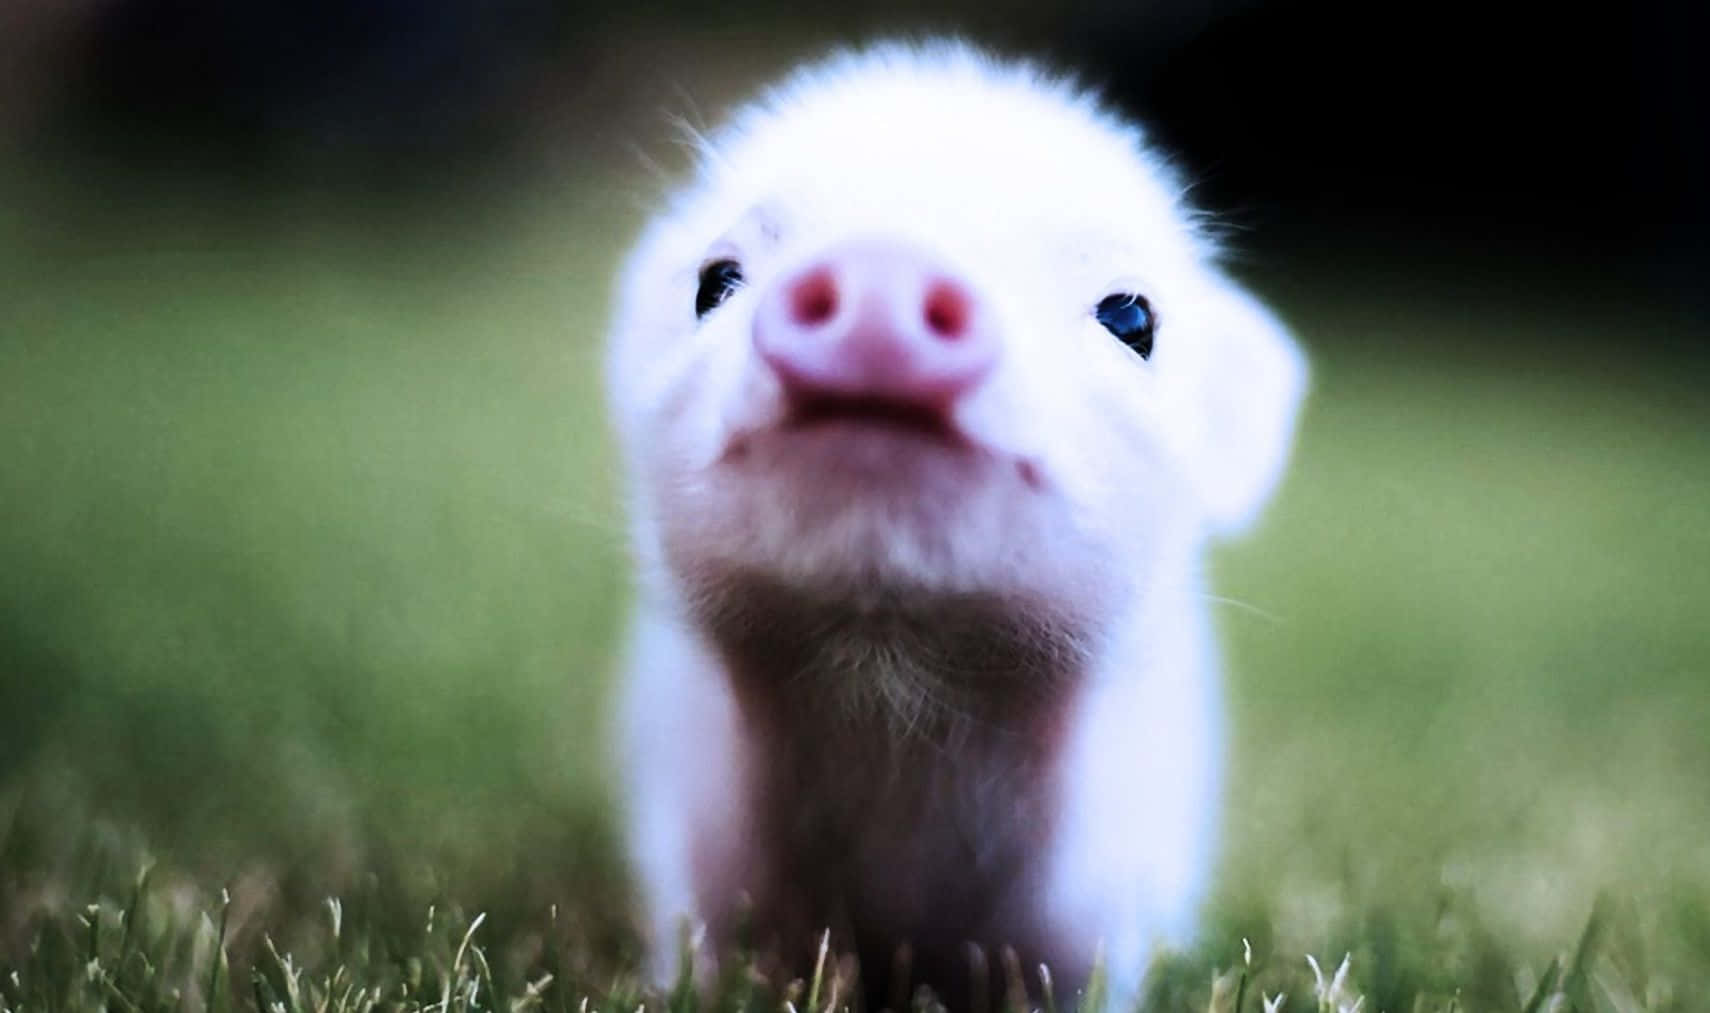 Cute and curious piglet